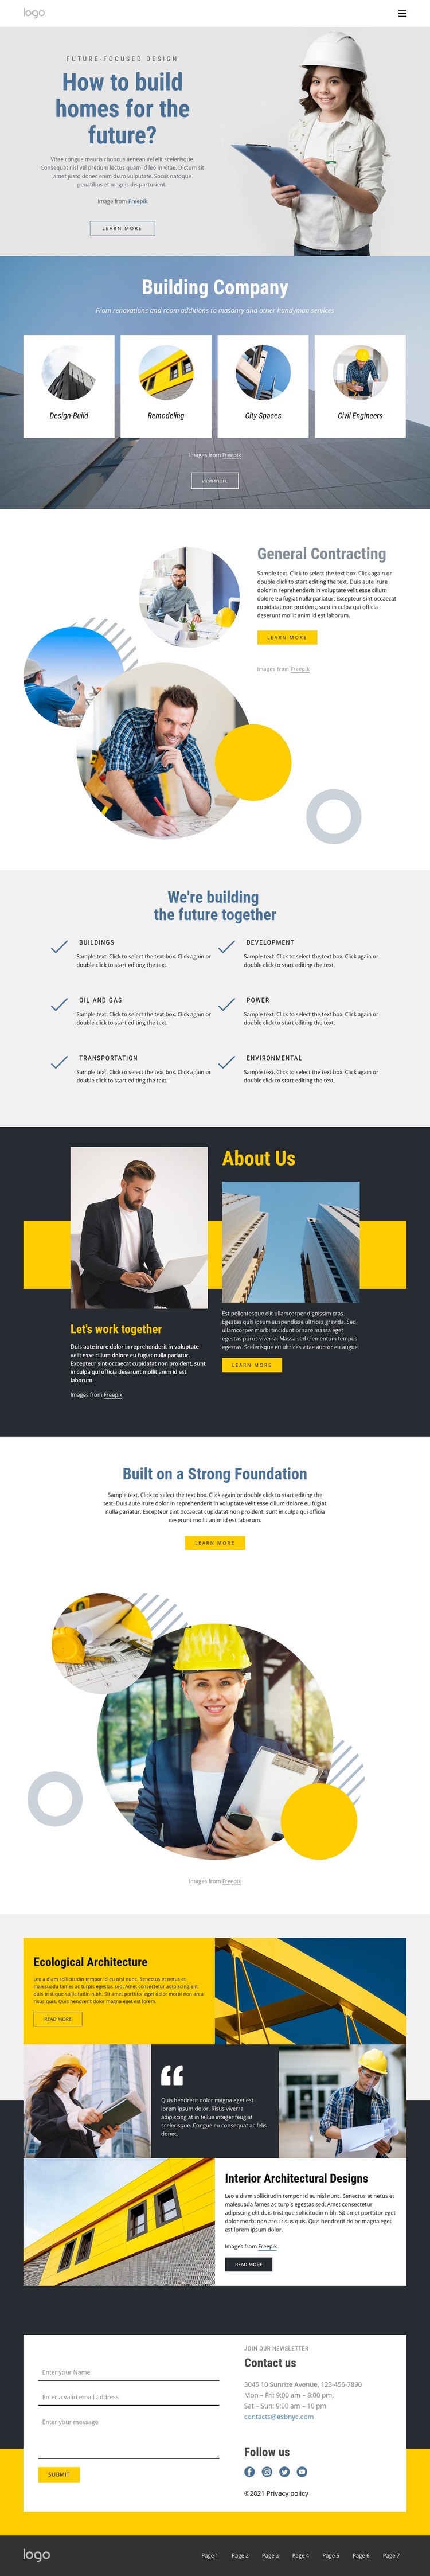 General contracting company Webflow Template Alternative